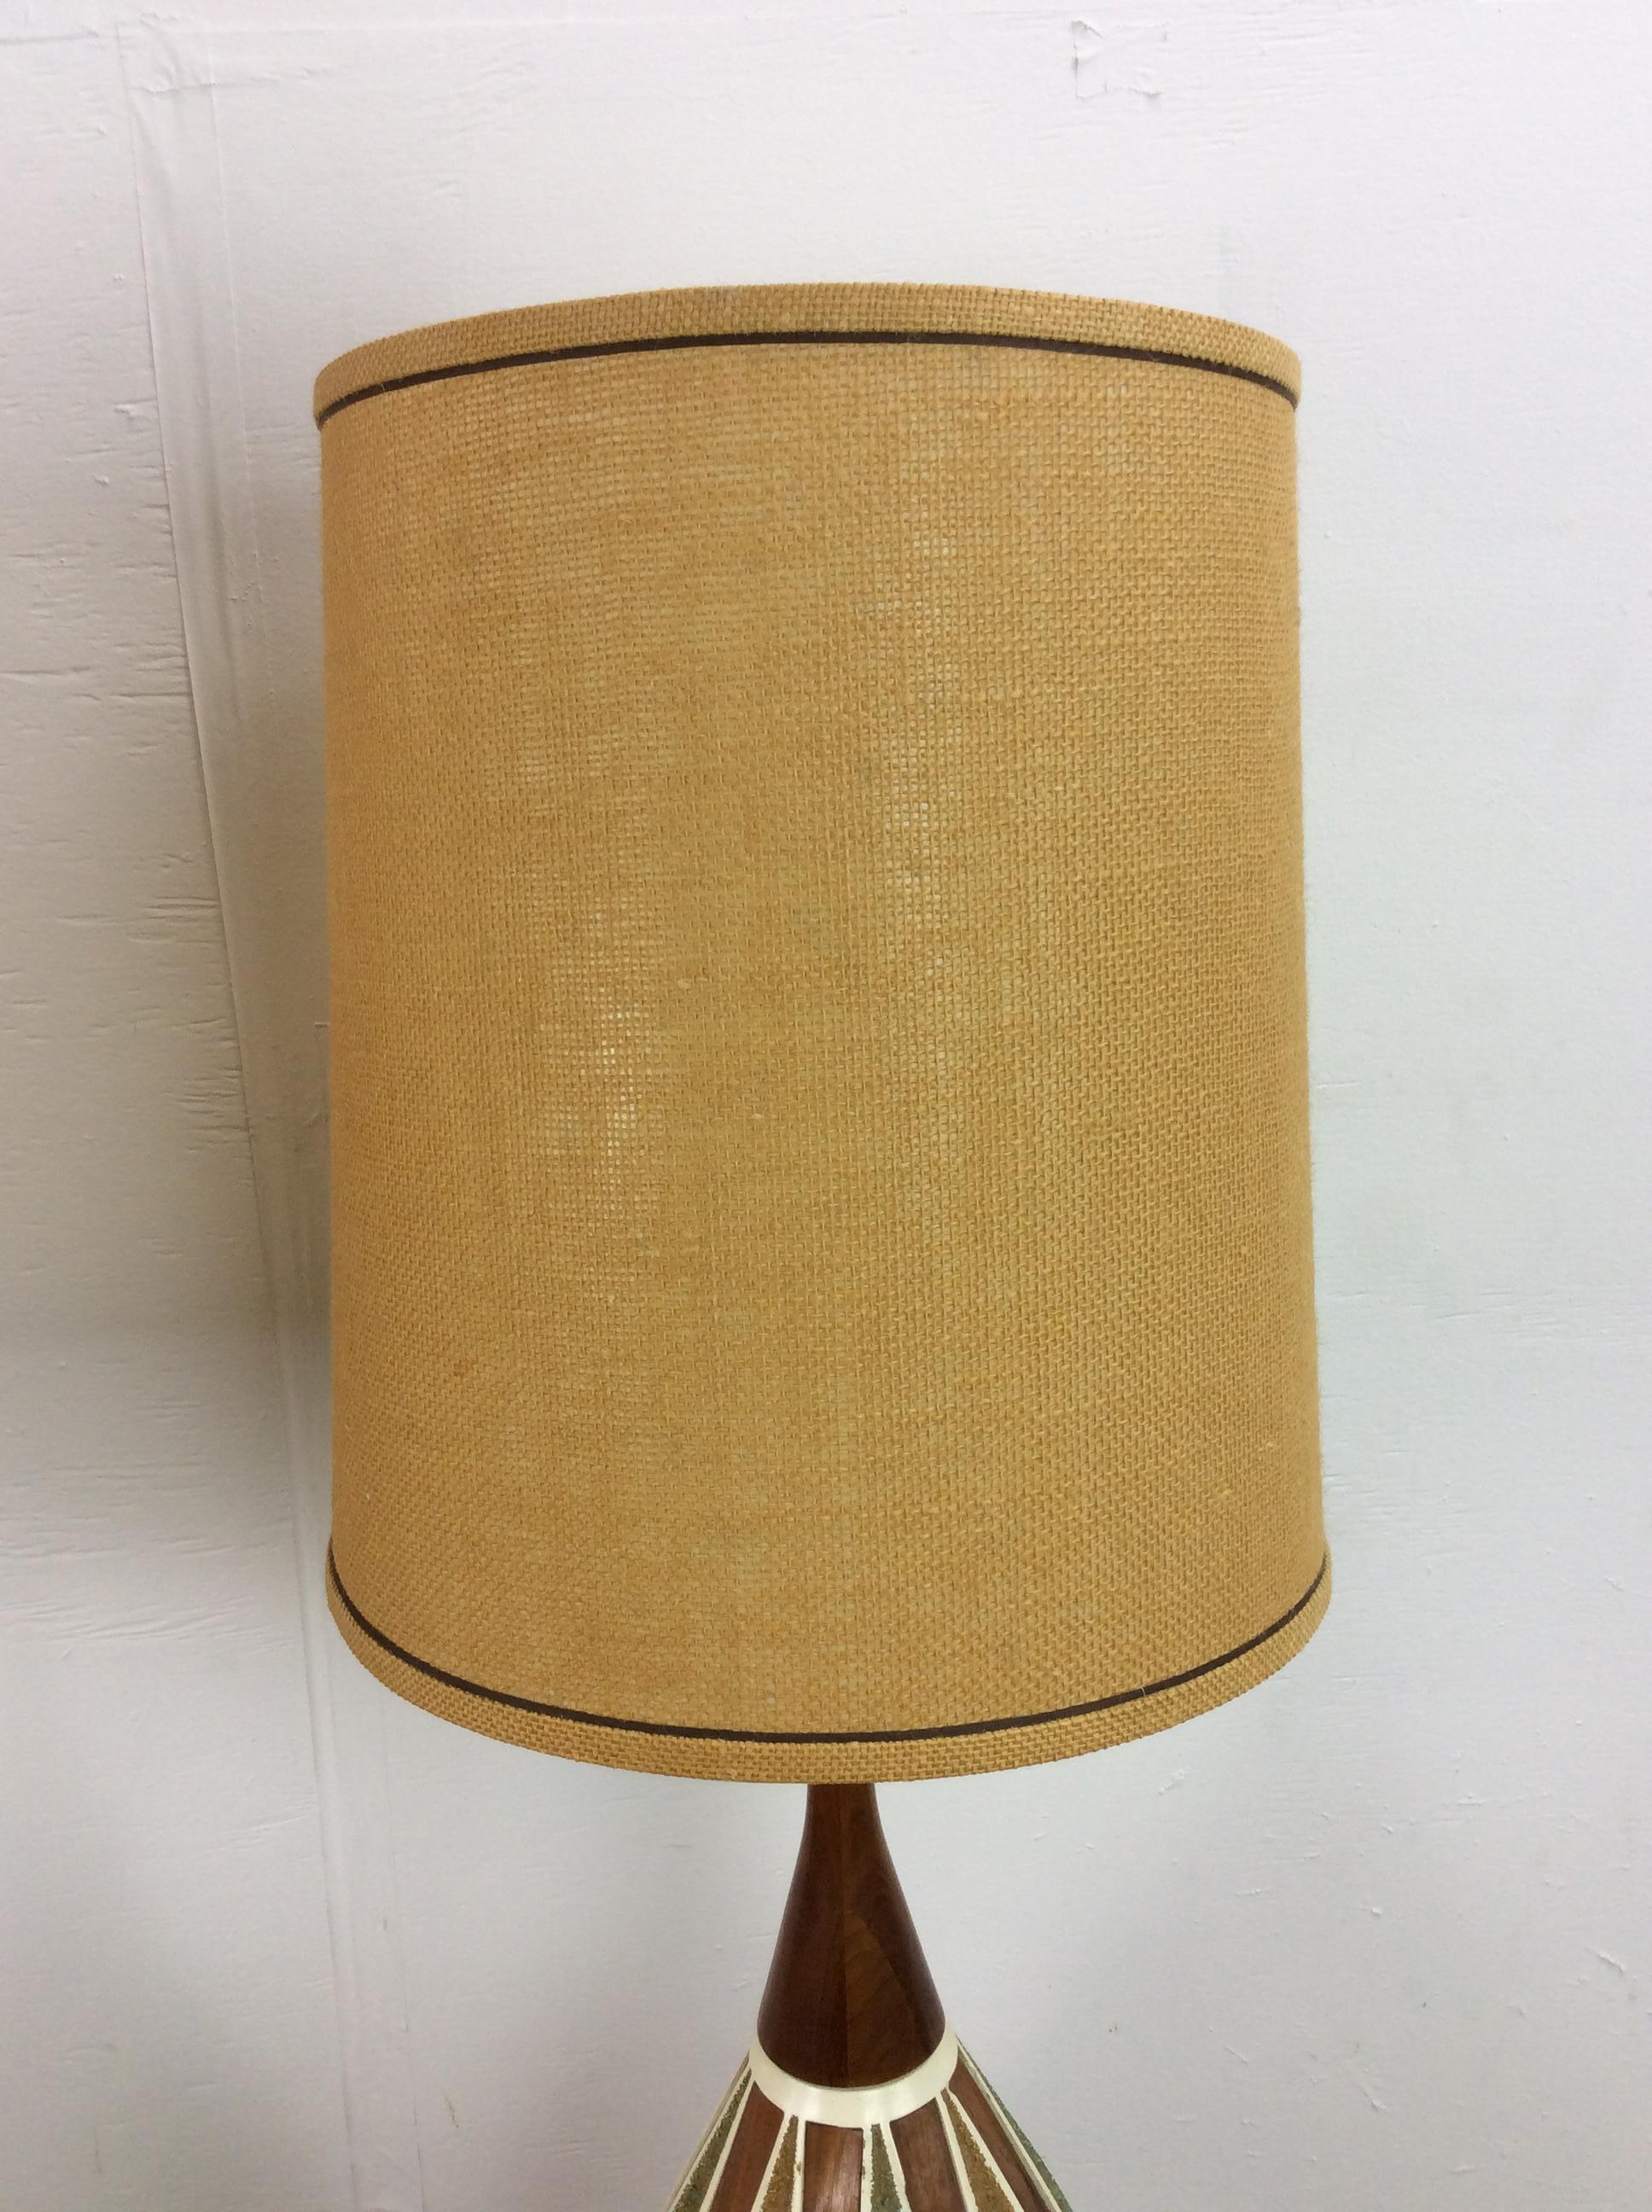 Pair of Mid Century Modern Ceramic Table Lamps with Barrel Shade For Sale 5